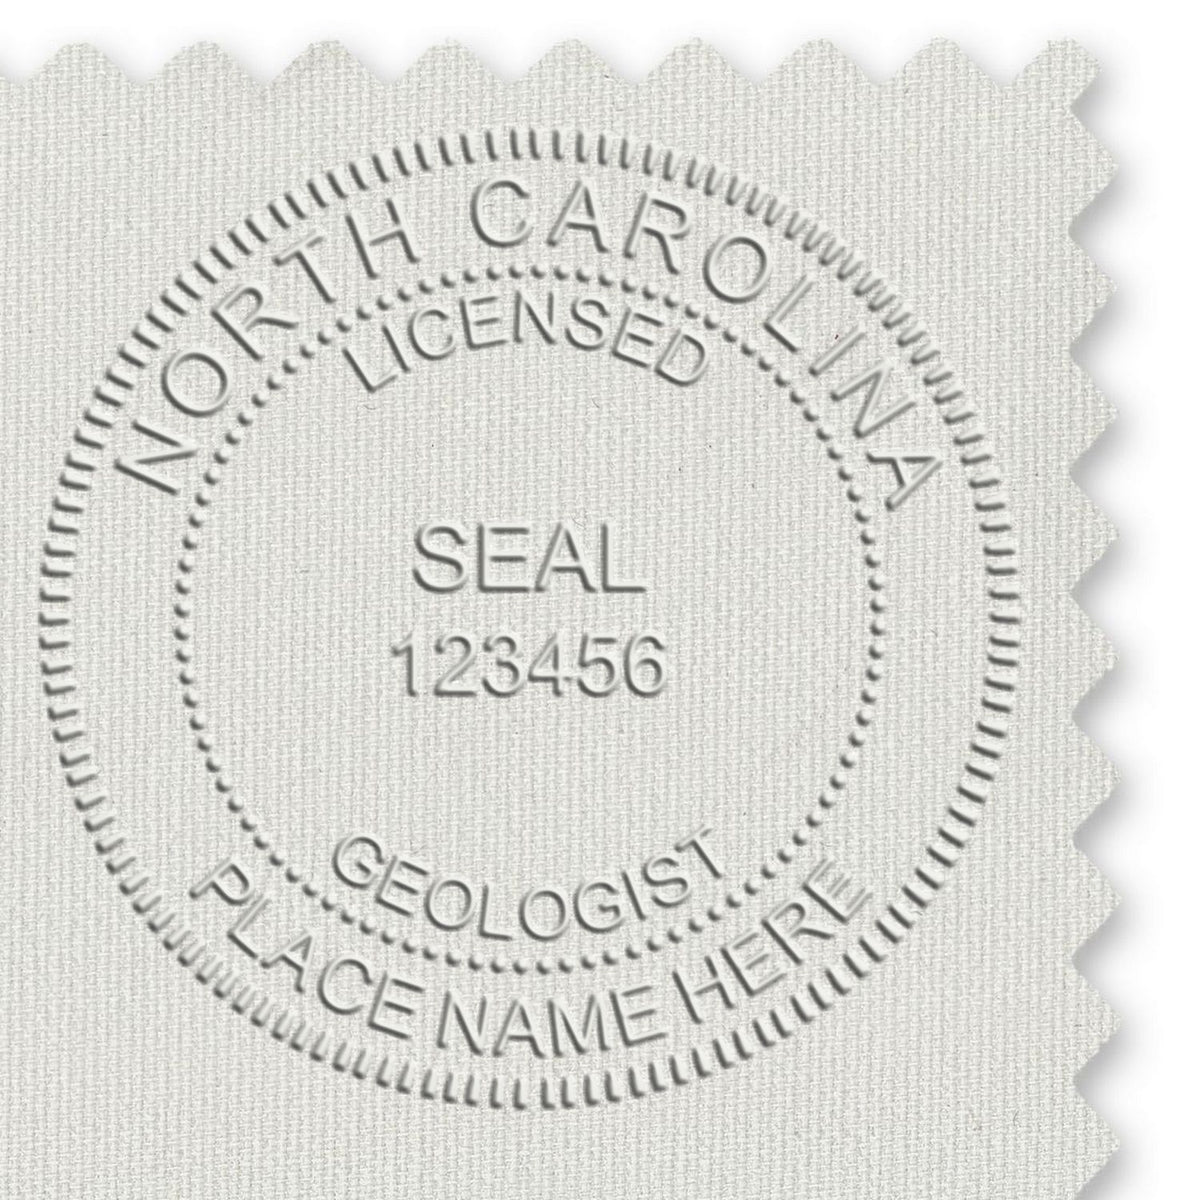 An in use photo of the Soft North Carolina Professional Geologist Seal showing a sample imprint on a cardstock